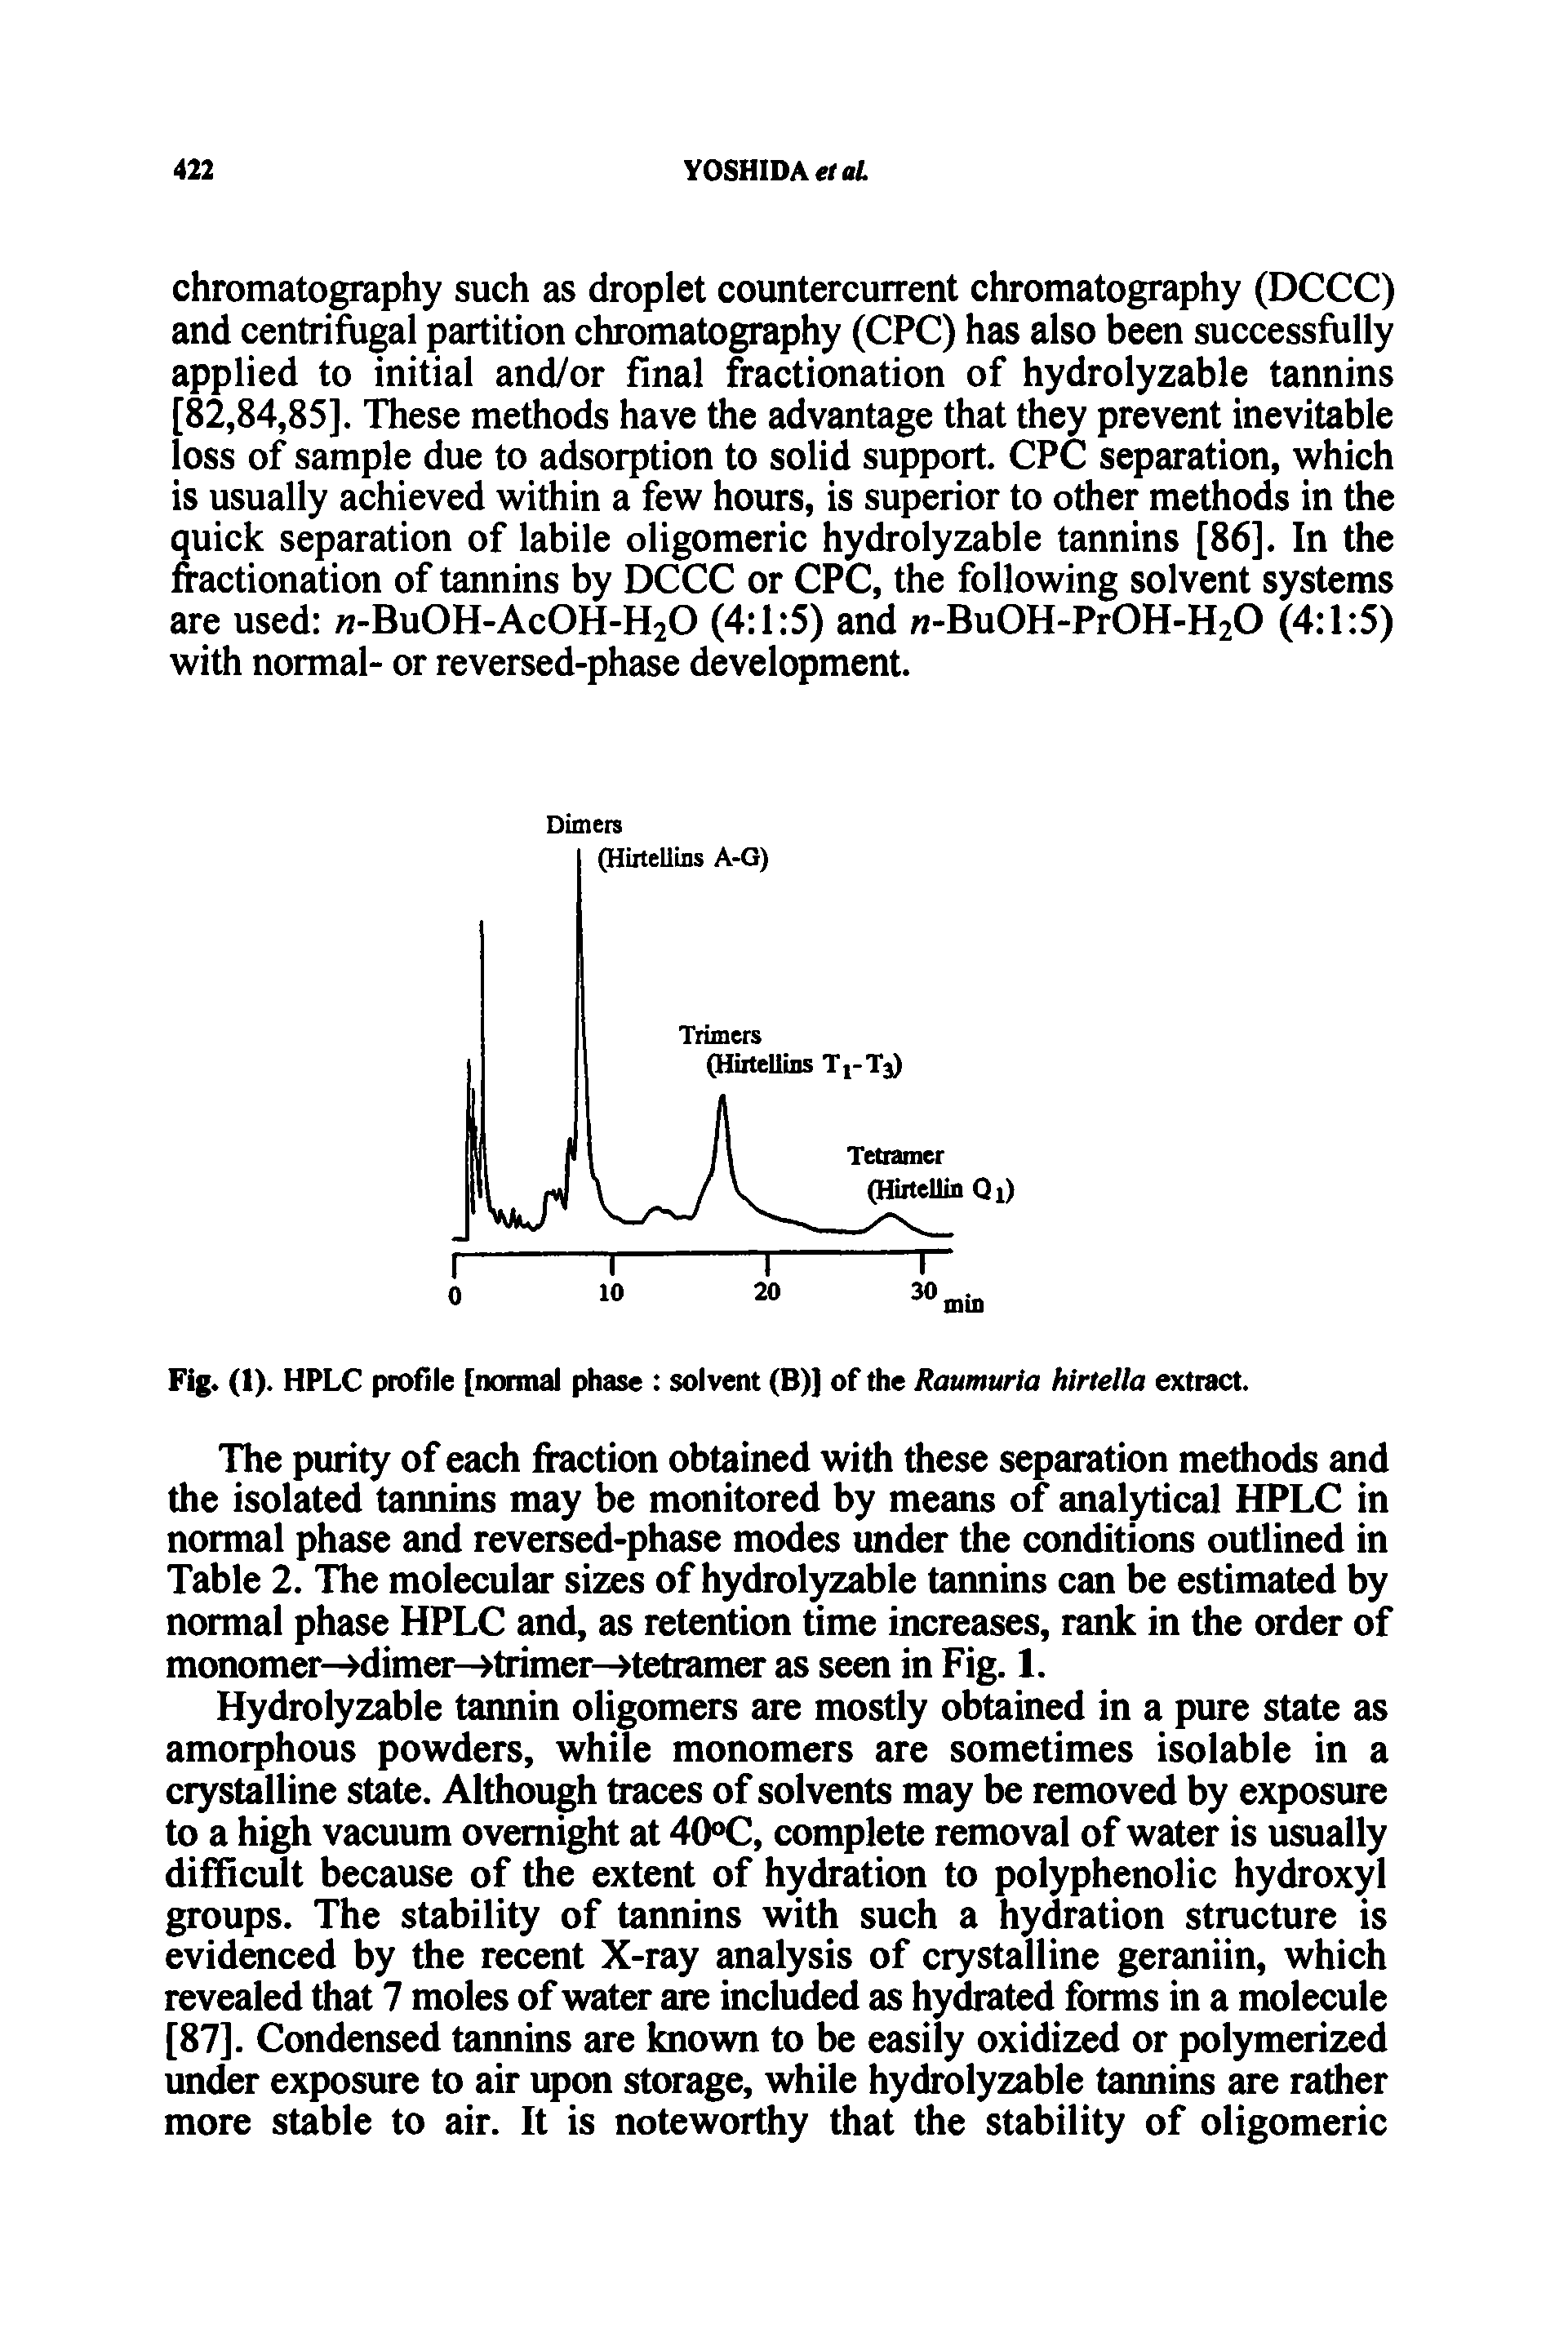 Fig. (1). HPLC profile [normal phase solvent (B)] of the Raumuria hirtella extract.